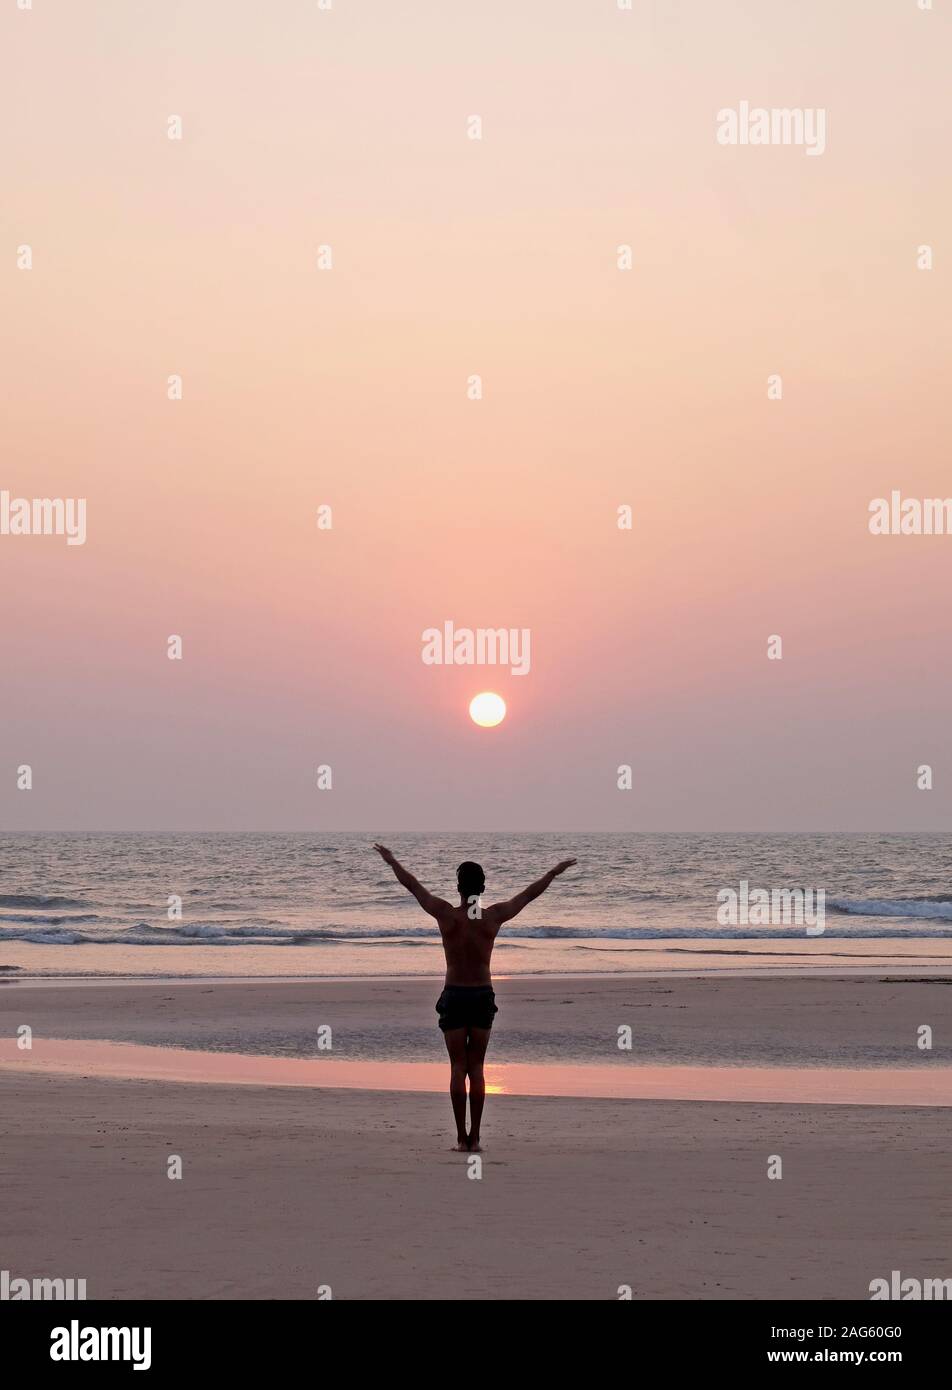 An unrecognizable man doing a yoga pose, the sun salutation on a wide open empty sandy beach, he is standing with his arms outstretched, he is lined u Stock Photo